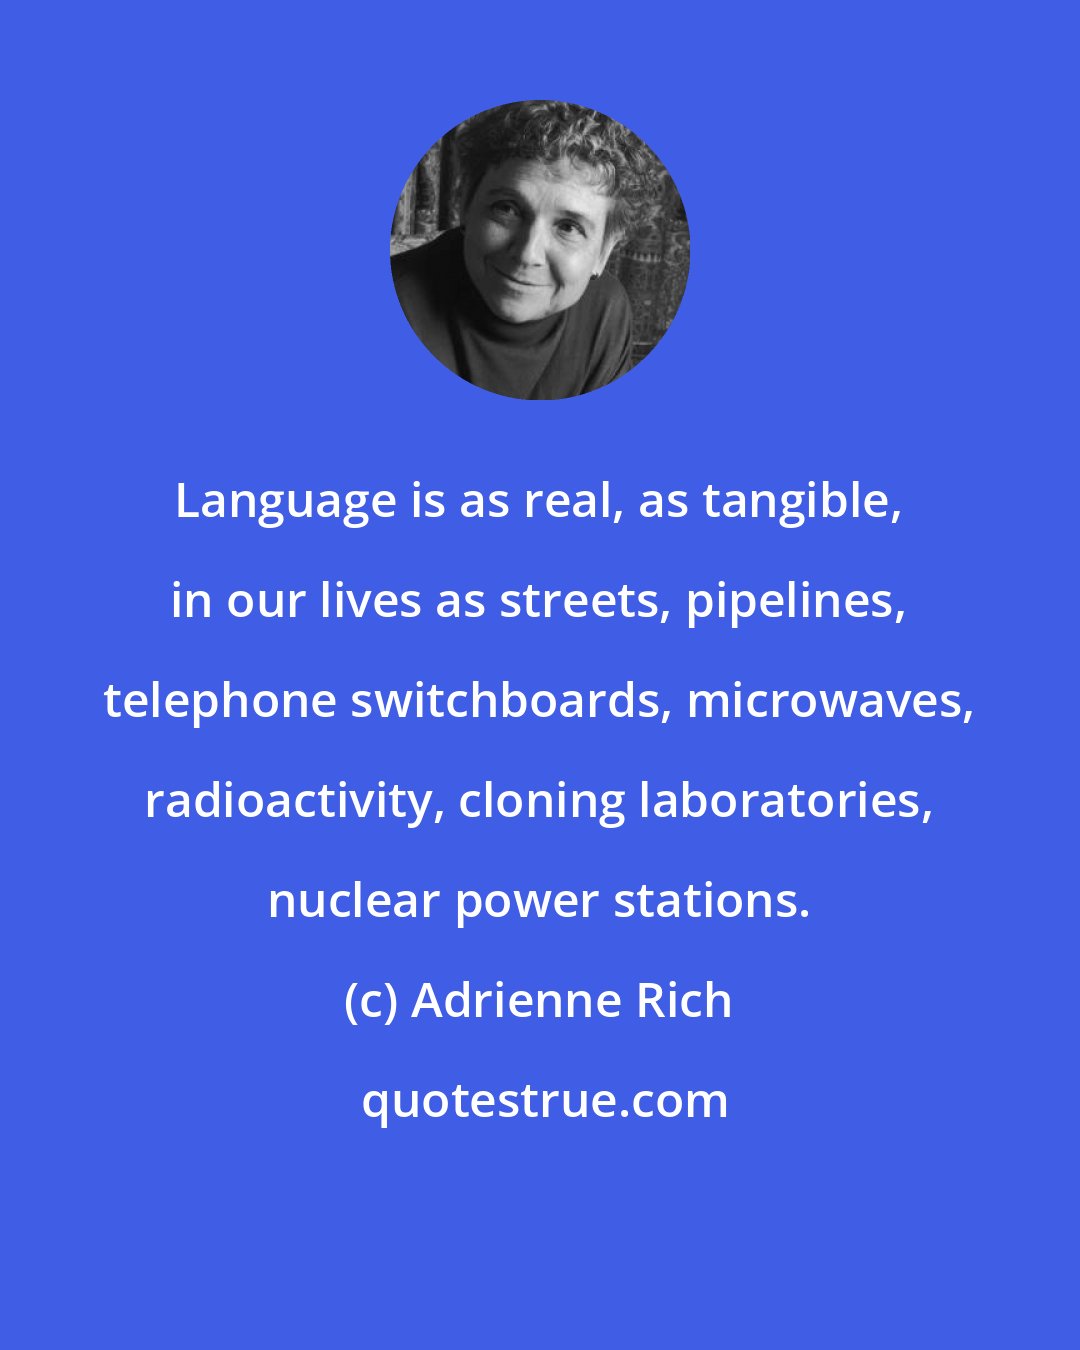 Adrienne Rich: Language is as real, as tangible, in our lives as streets, pipelines, telephone switchboards, microwaves, radioactivity, cloning laboratories, nuclear power stations.